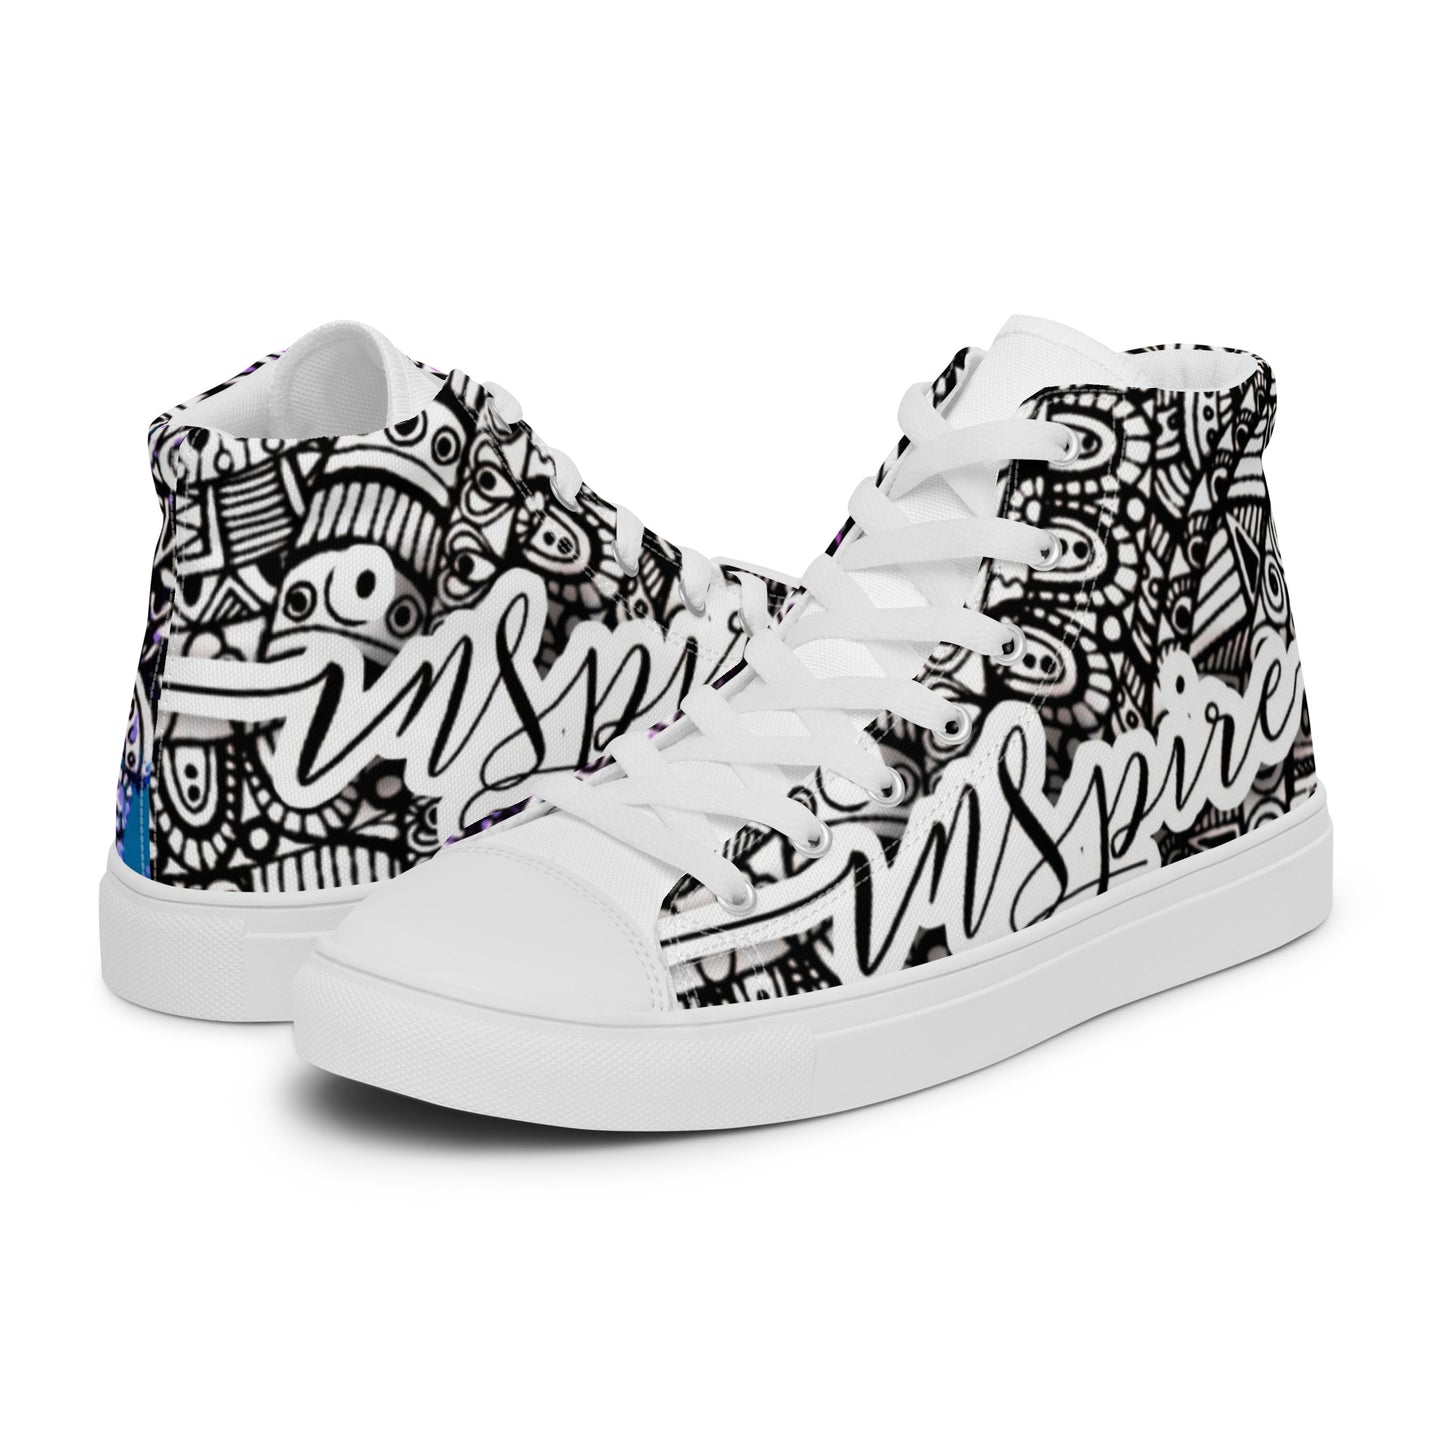 Inspire high top canvas shoes